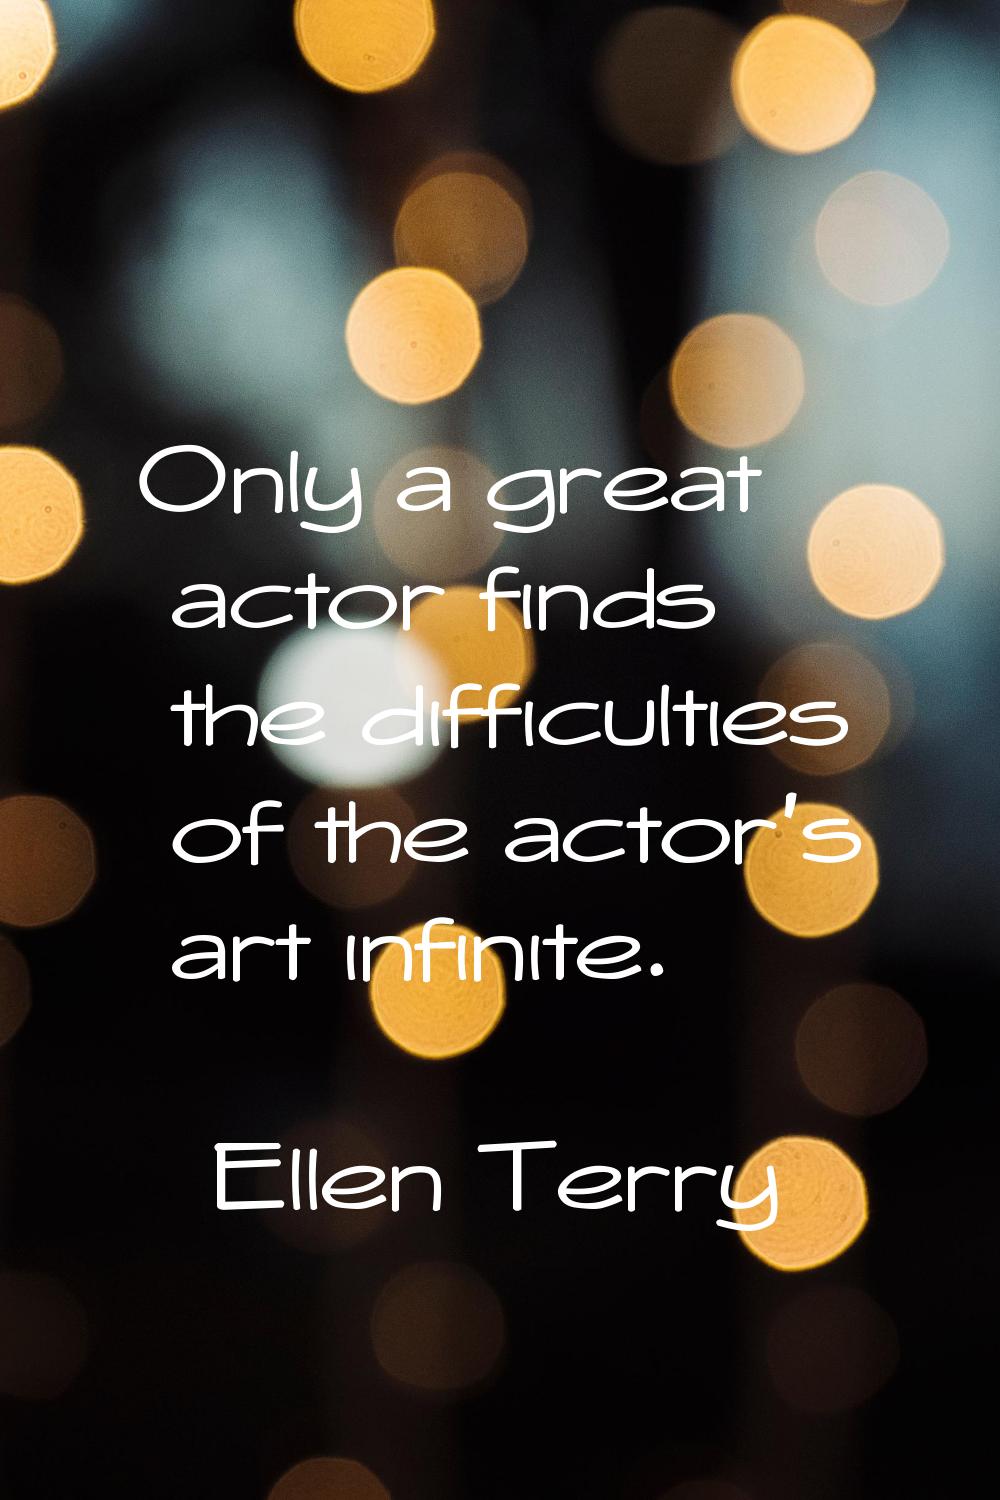 Only a great actor finds the difficulties of the actor's art infinite.